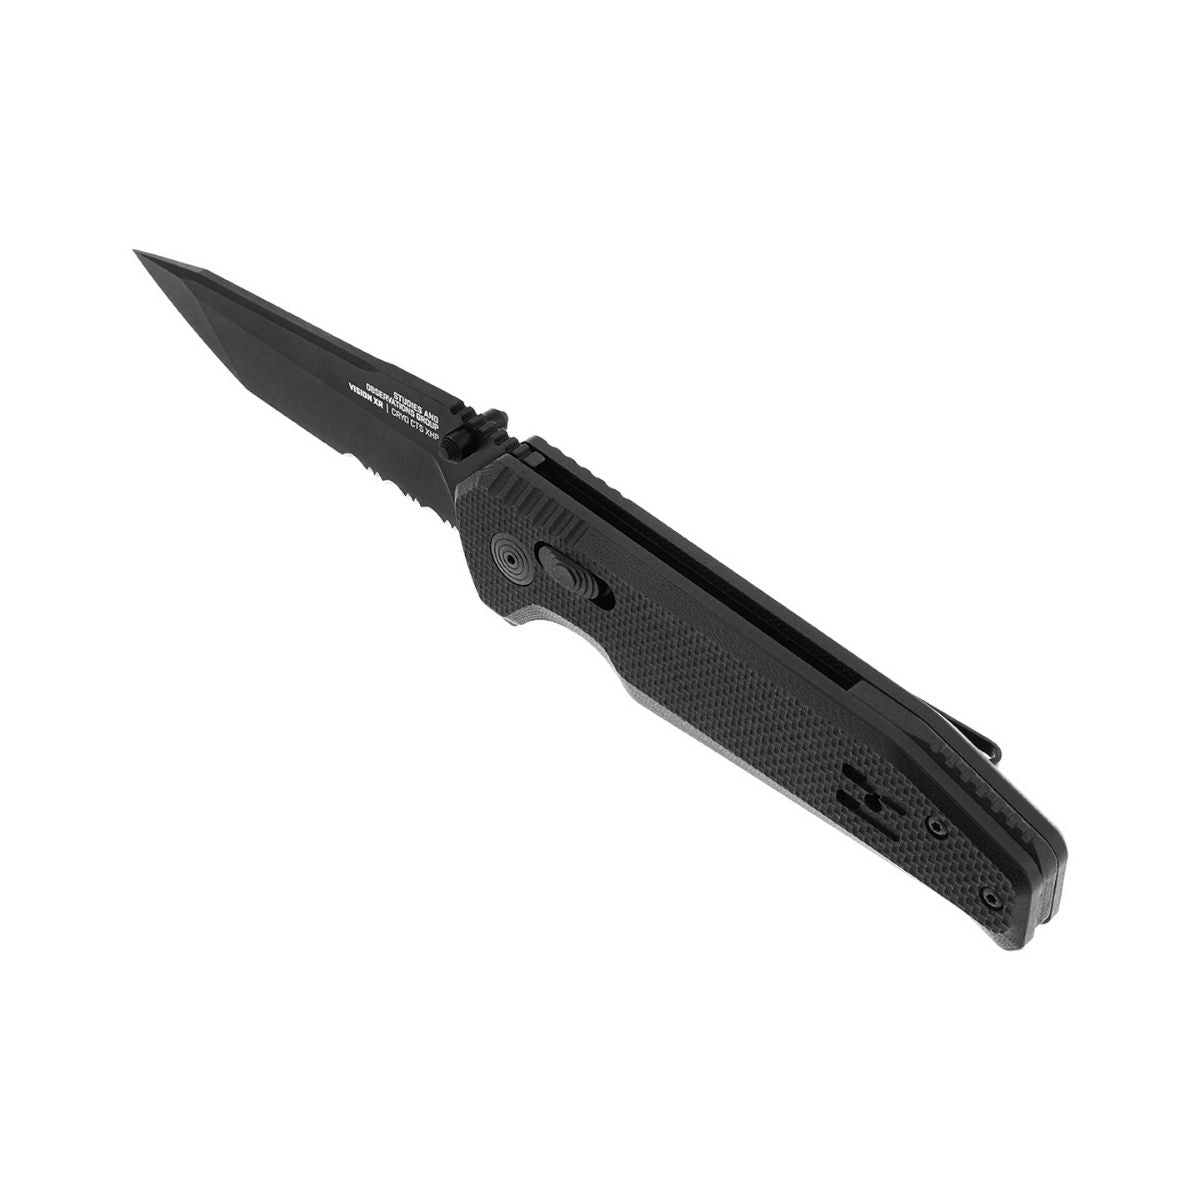 SOG Vision XR Serrated 3.36" Tanto Combo Blade Knife - 12-57-02-57 - Outdoor Travel Gear 2